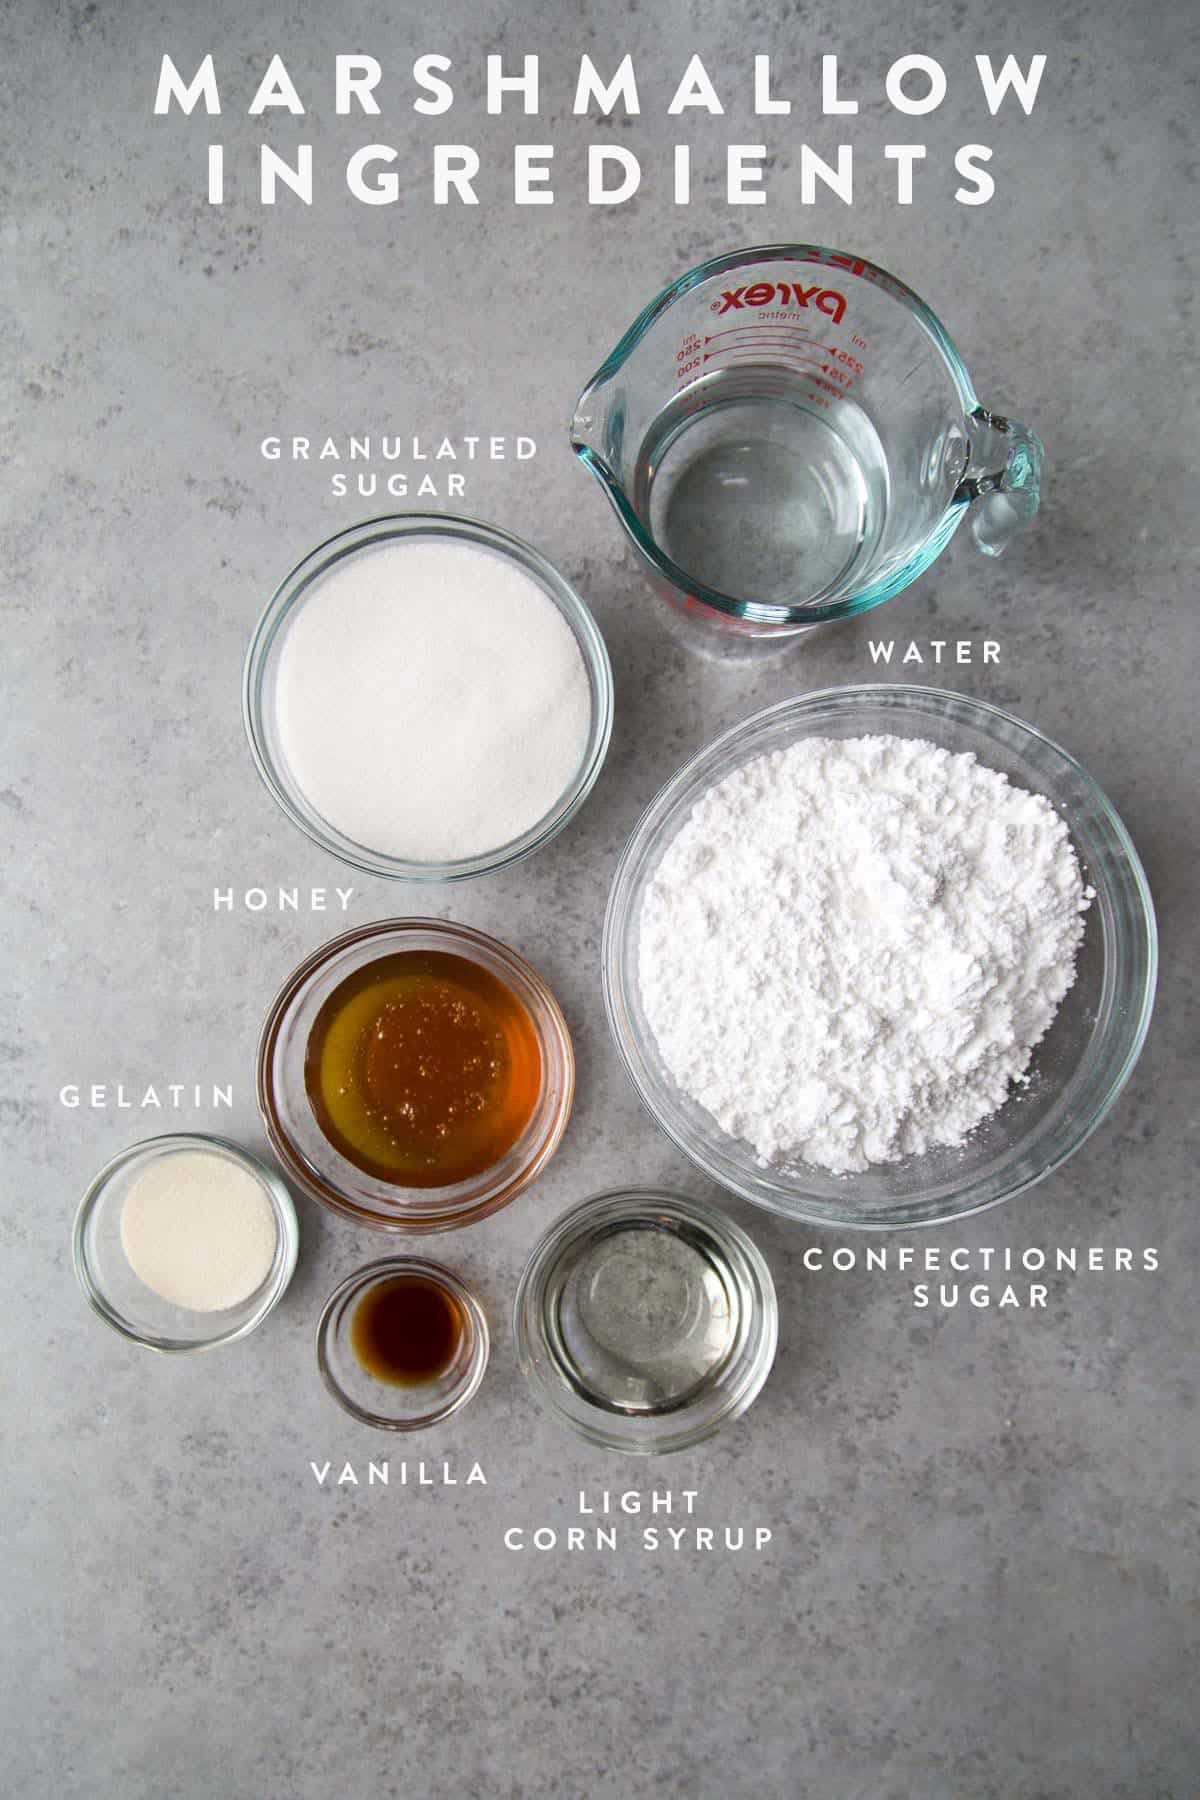 ingredients needed to make homemade marshmallows include gelatin, honey, and corn syrup.